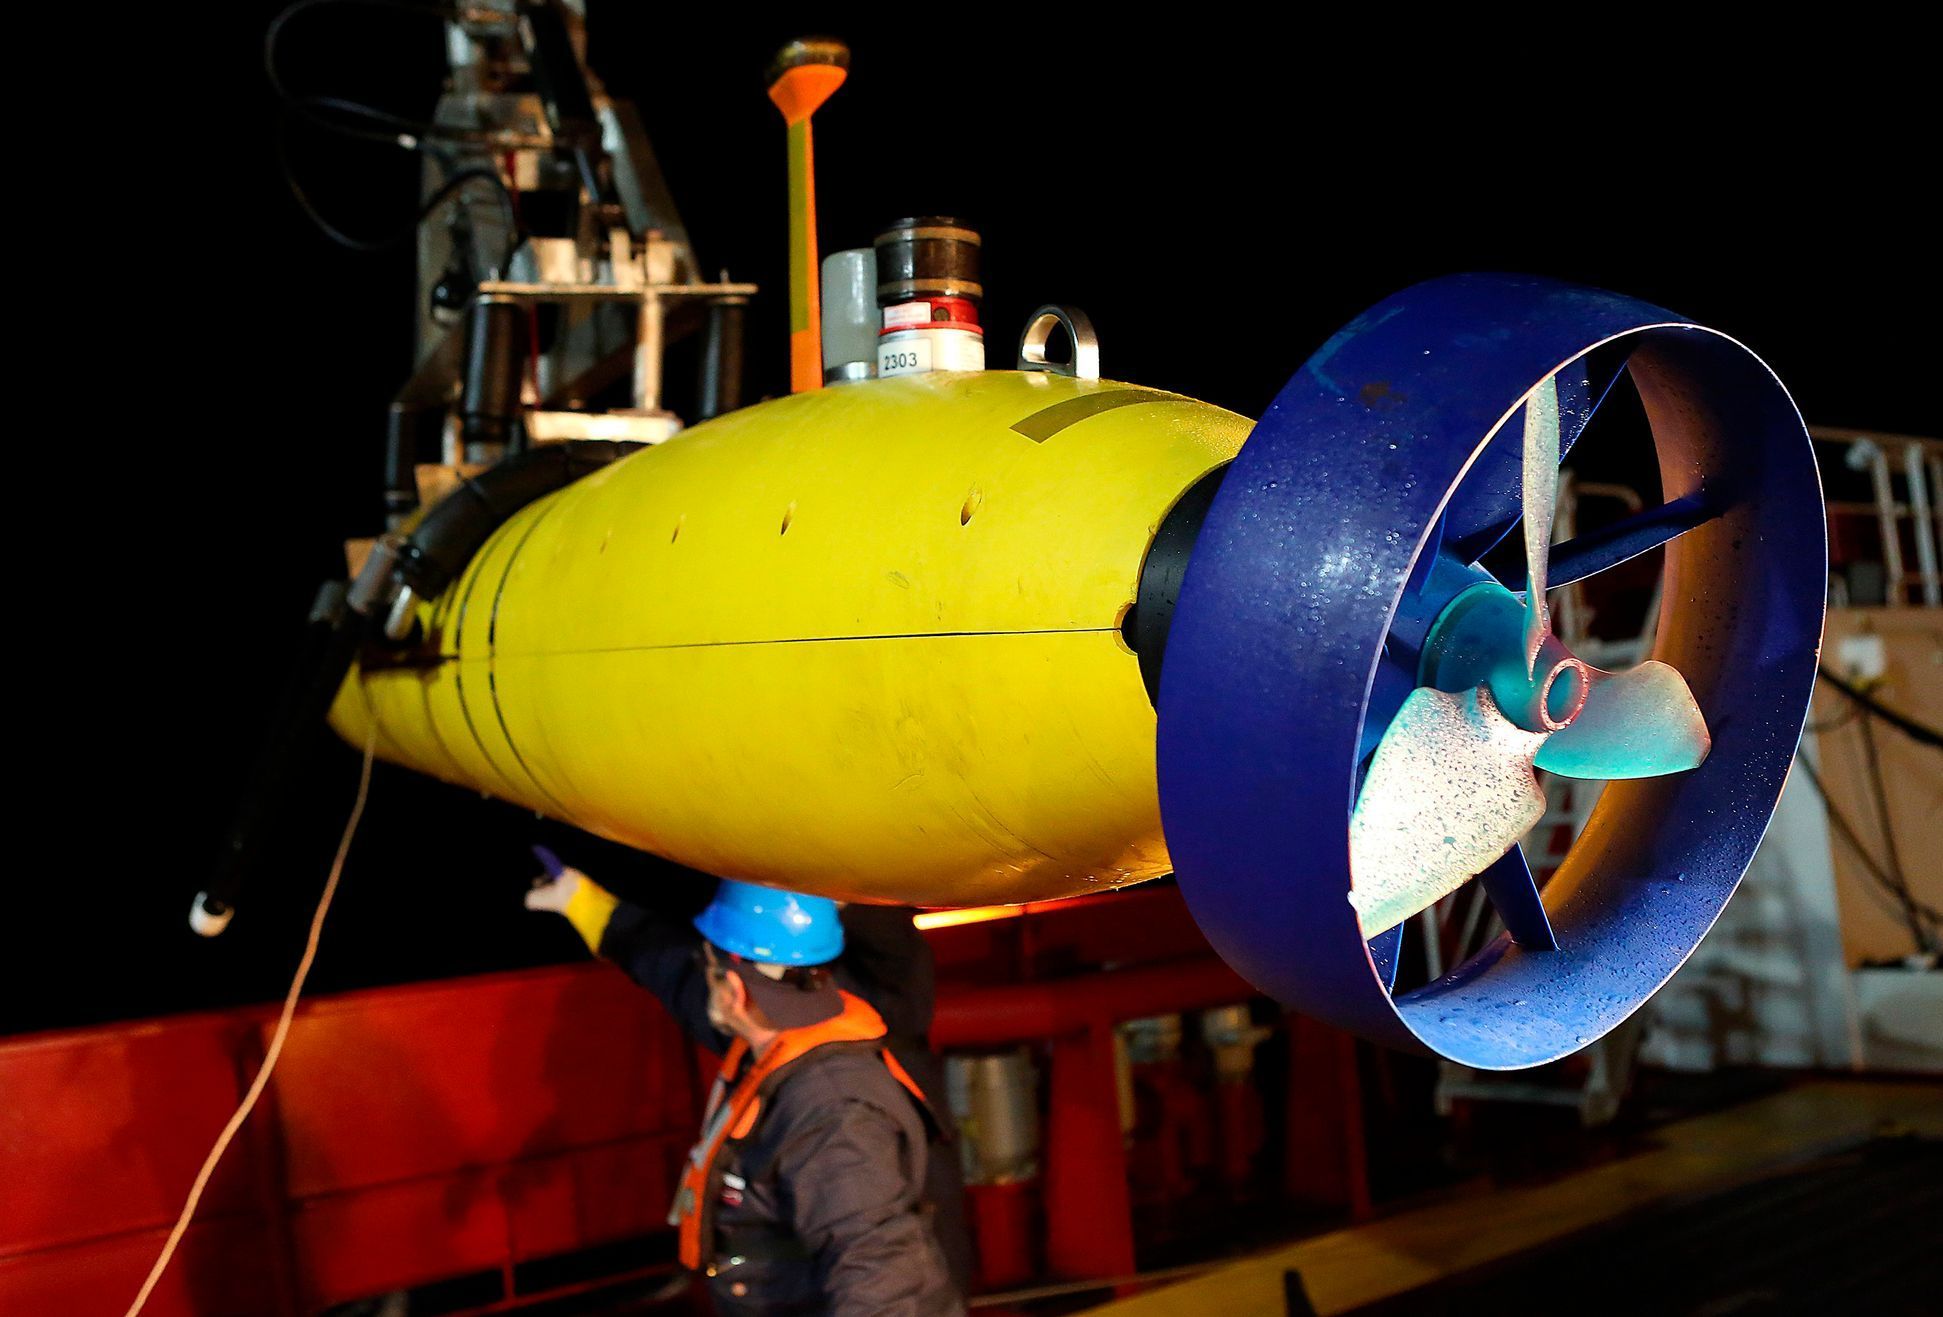 The Phoenix International AUV Artemis, also known as the Bluefin-21, is prepared for deployment from the Australian Defence Vessel Ocean Shield in the search for missing Malaysia Airlines Flight MH370